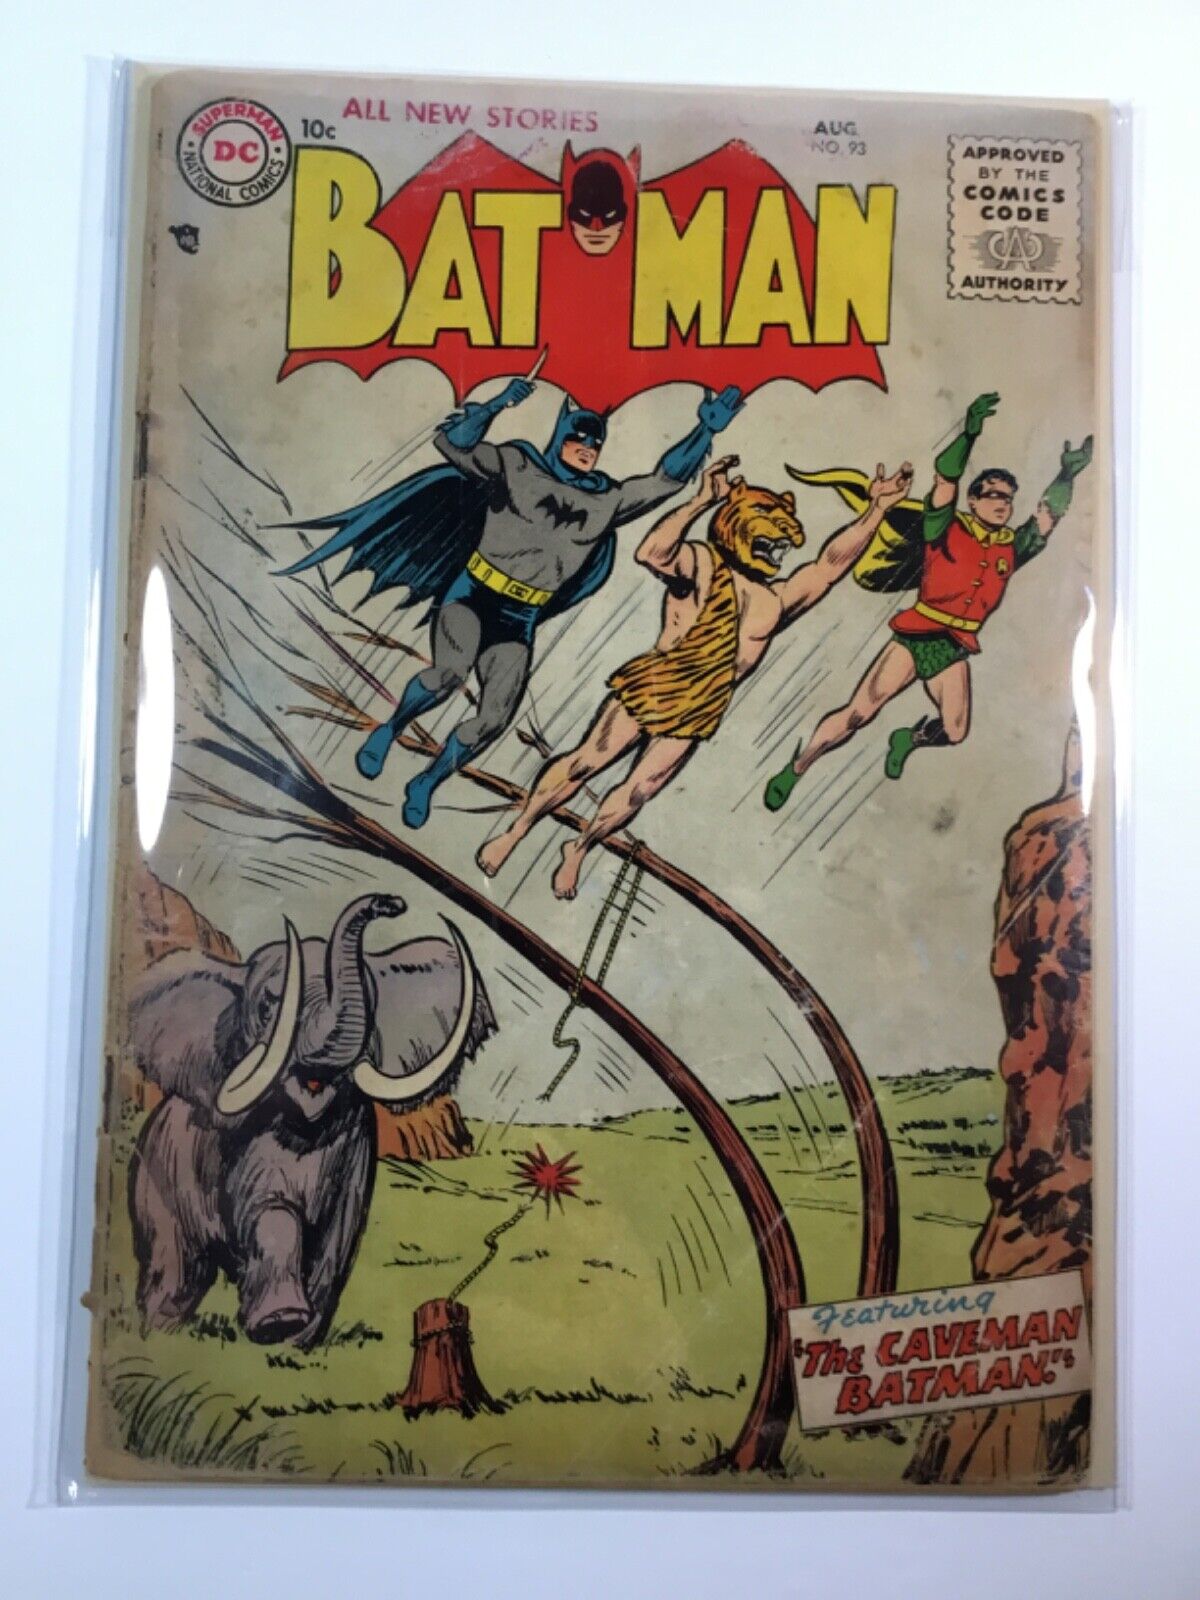 BATMAN #93 FR 1.0🏆CLASSIC 1955 DC GOLDEN AGE COVER BY: WIN MORTIMER🏆